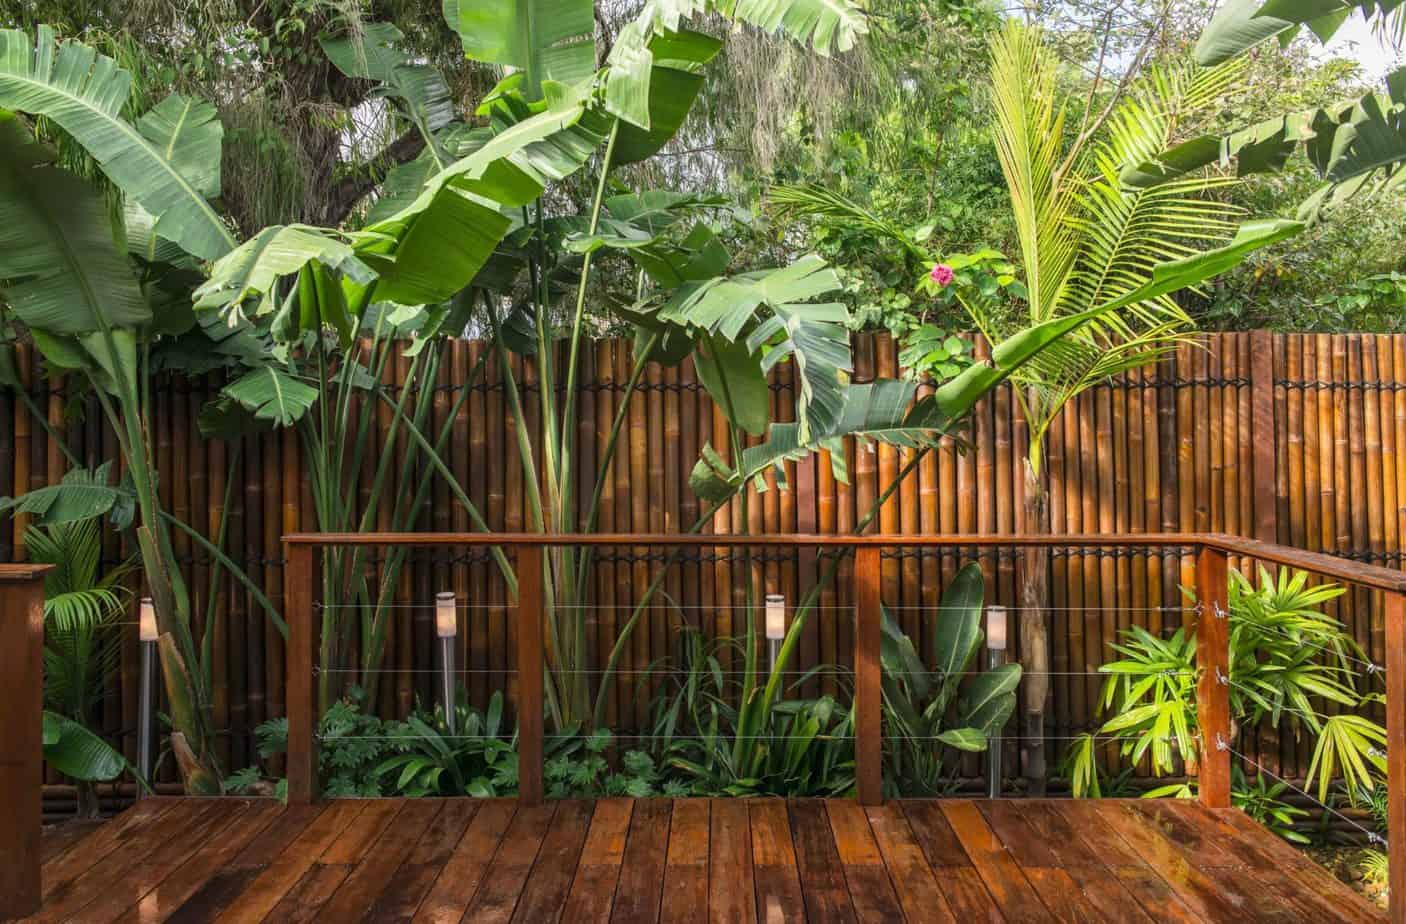 Bamboos and bananas providing a protective canopy and create the feeling of a jungle